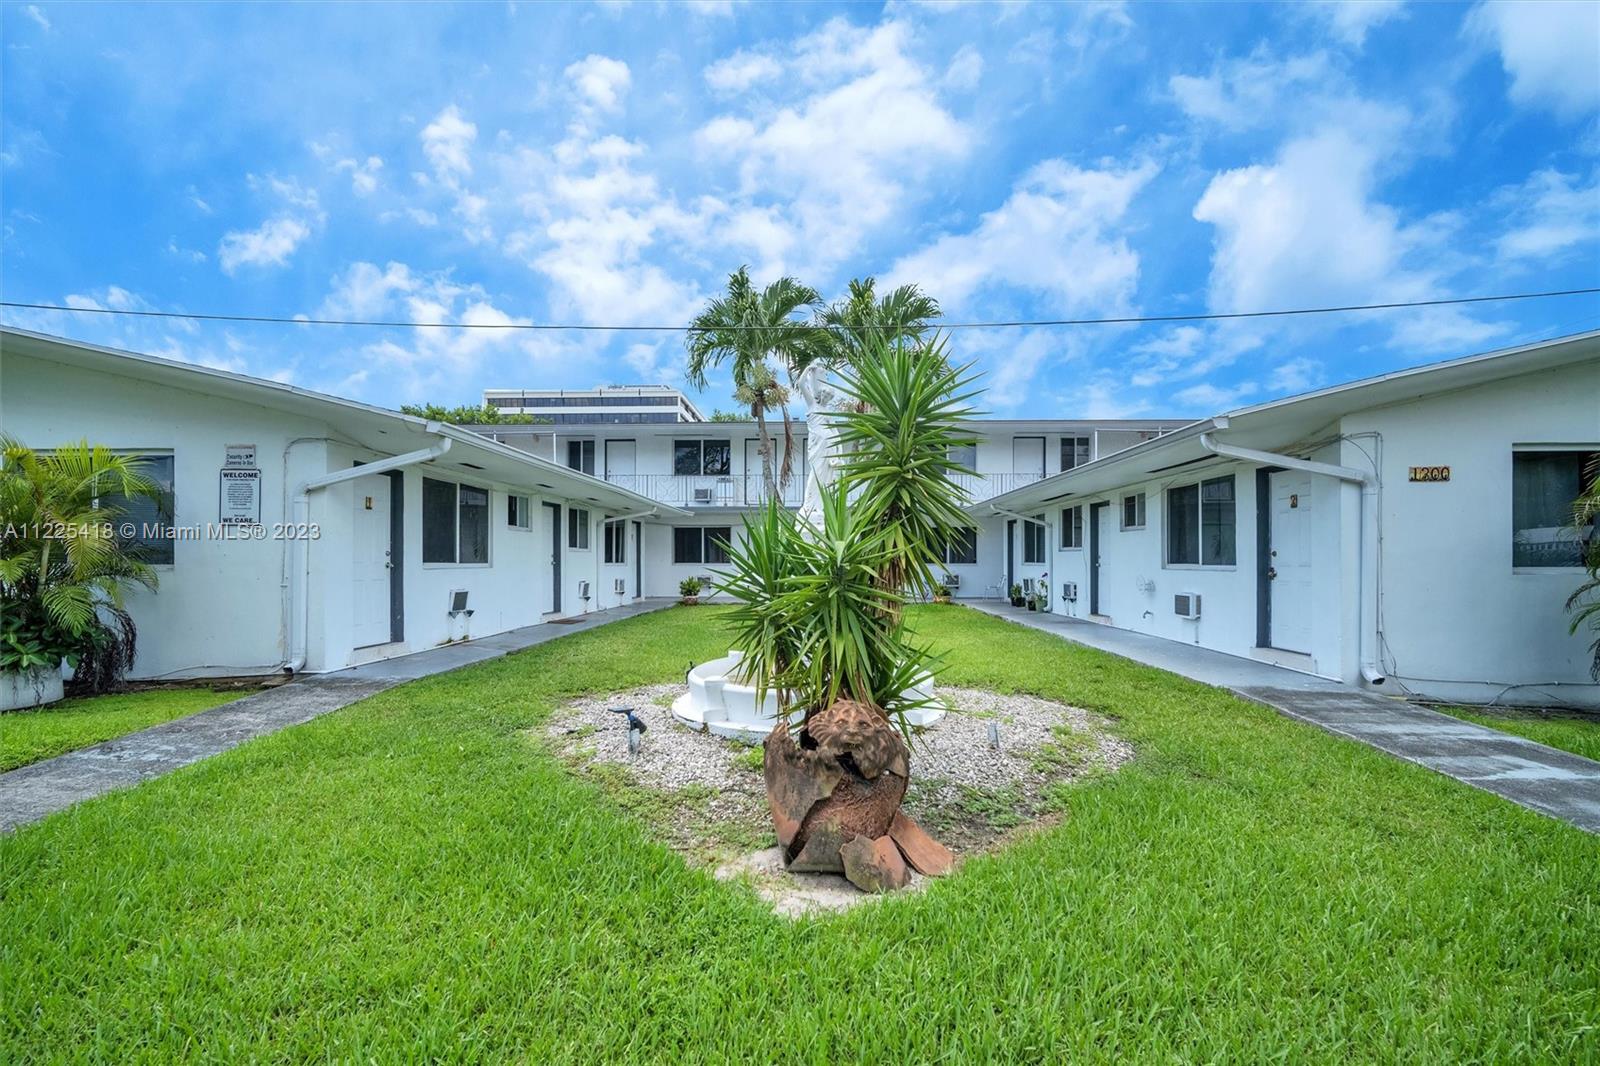 Rarely Available 12 Unit Multi-Family, Over $15,500/mo Rental Income! 18,750 sf corner lot! ATTENTION INVESTORS AND END USERS = CAPITAL RATE OF 11% WITH AIRBNB OR 6% WITH ANNUAL LEASES with UPDATED RENT, and 4% CURRENT rent! Welcome to the HOT Miami neighborhood of Biscayne Park. The property consists of 3 buildings; the main building has two heights distributed in 8 apartments of 1/1 plus laundry on the ground floor. The second and third buildings are distributed on the sides of the main one and both have an apartment of 2/1 and another of 1/1. have fenced yards for private outdoor tenant space and additional income potential, Fully fenced lot has 12 private indoor parking spaces, plus plenty of street parking. DO NOT disturb tenants. RU-3M zoned area see refer: A11223512